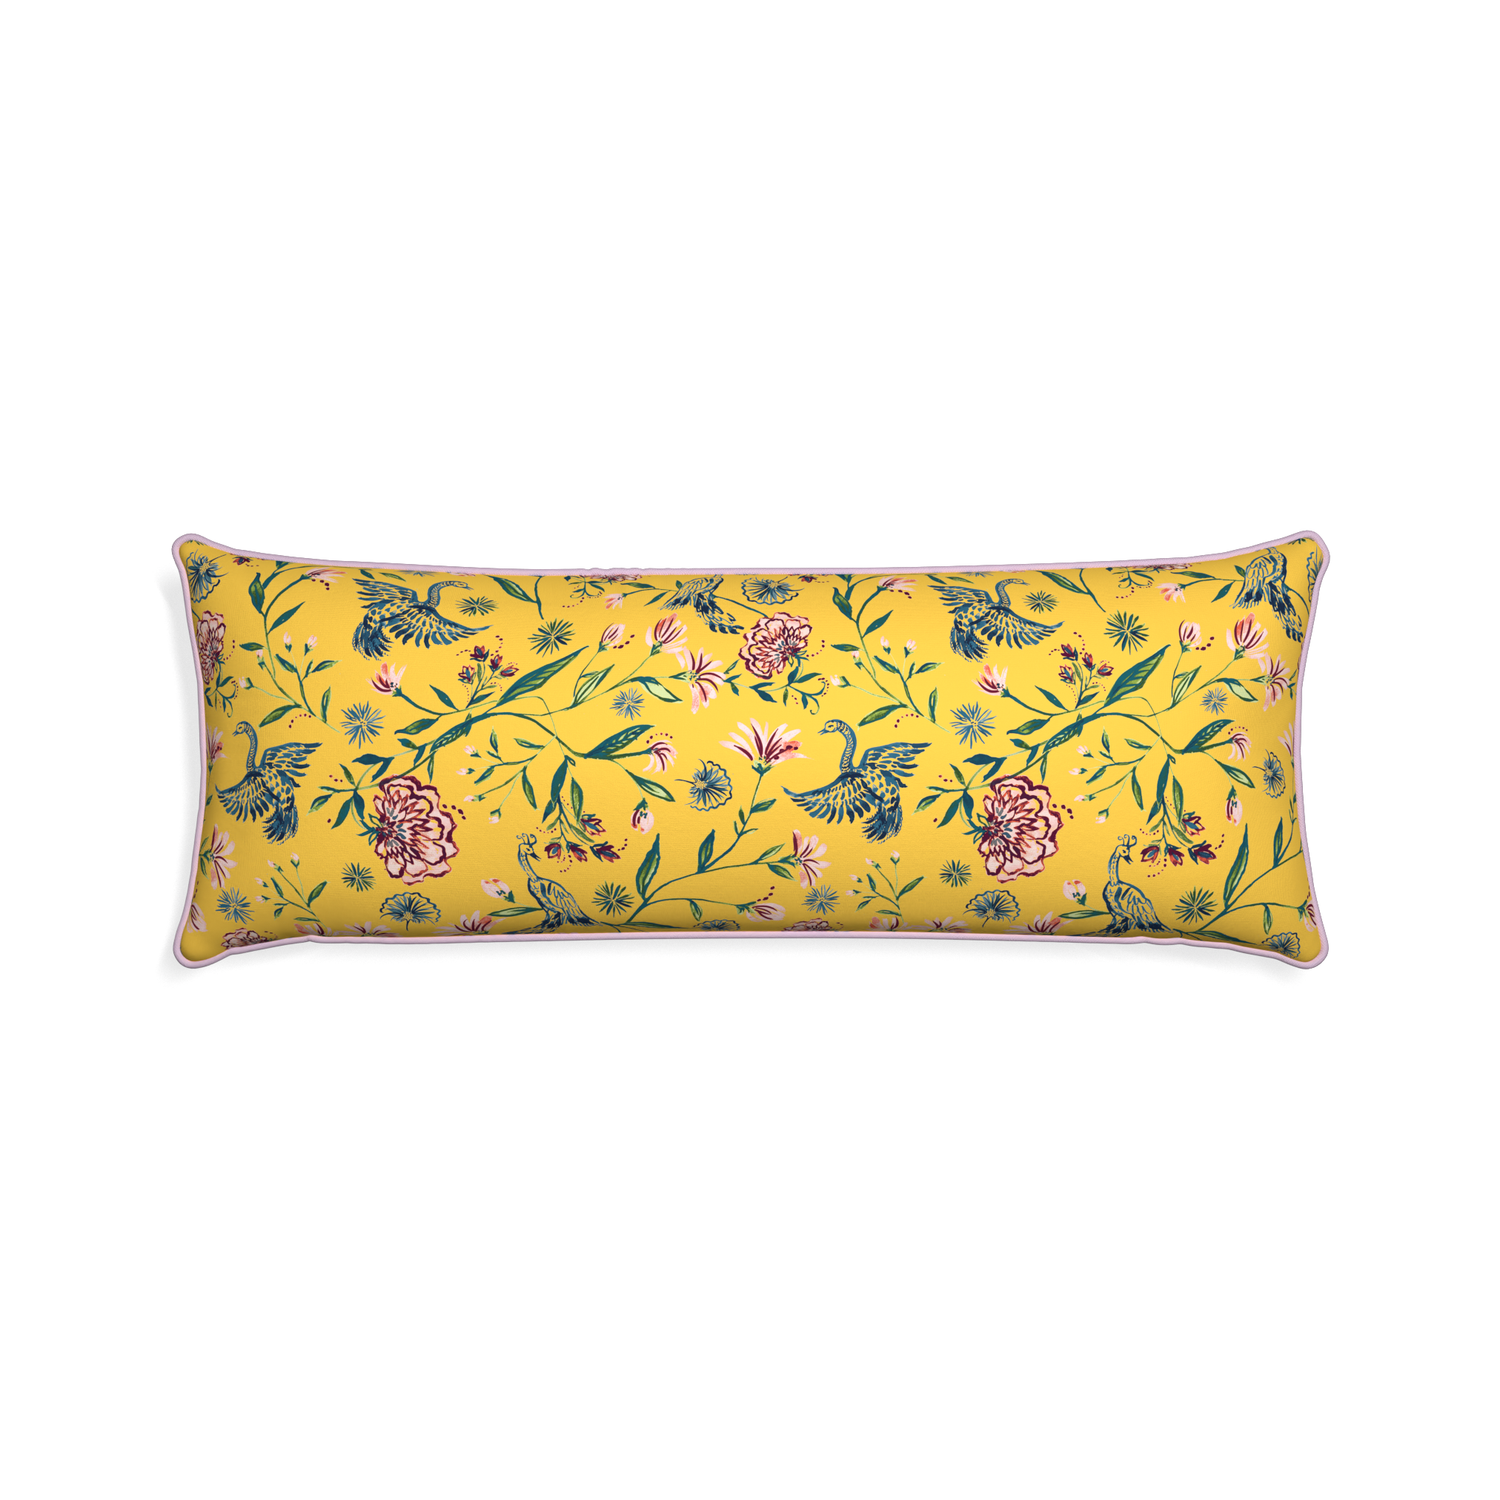 Xl-lumbar daphne canary custom pillow with l piping on white background